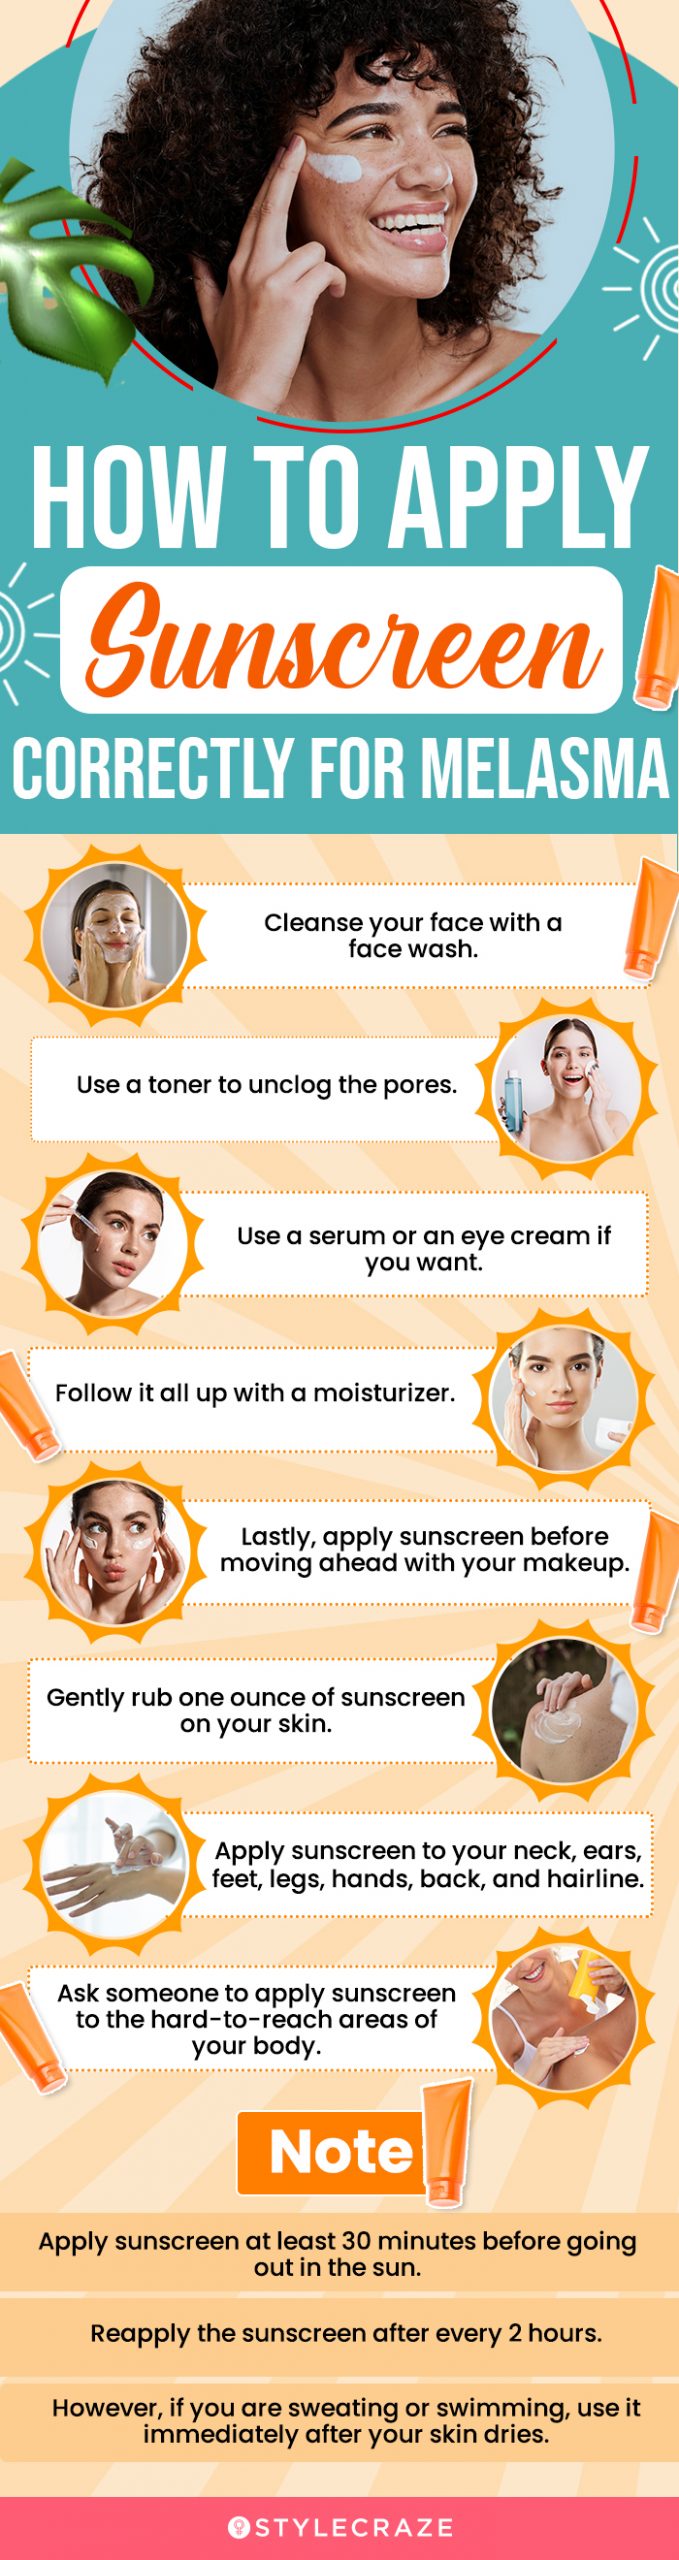 How To Apply Sunscreen Correctly For Melasma (infographic)